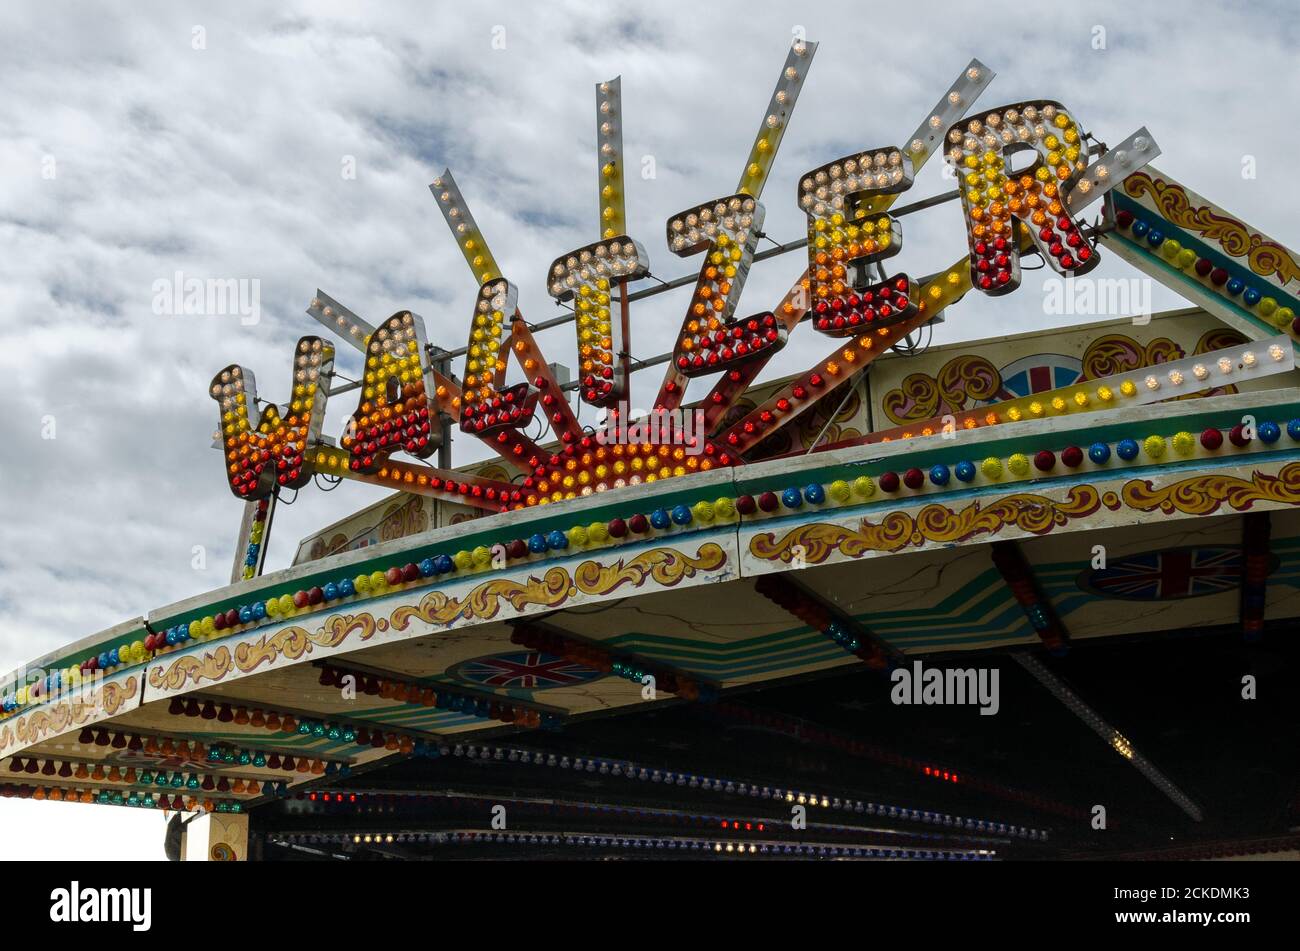 The front of the Waltzer Fairground ride at the end of the Brighton Pier, in East Sussex, England Stock Photo